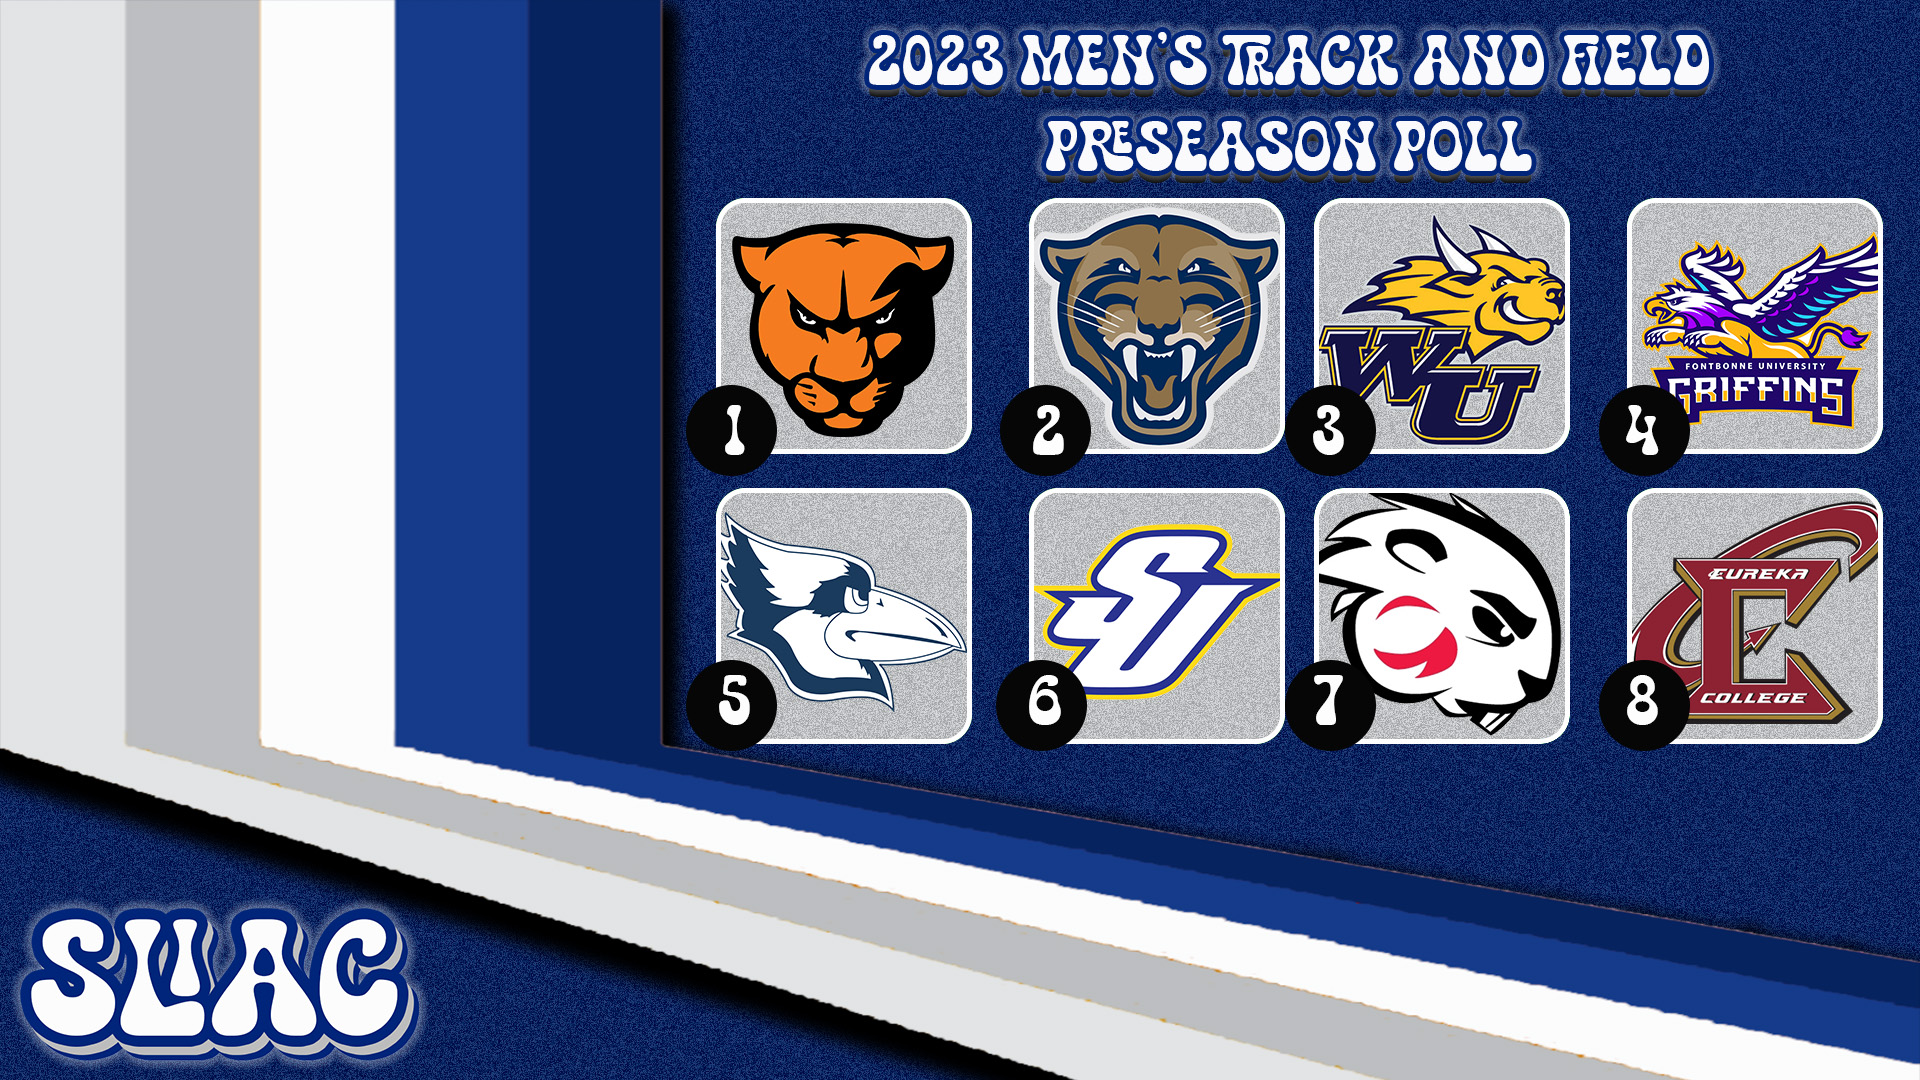 Panthers Chosen First in Men's Track and Field